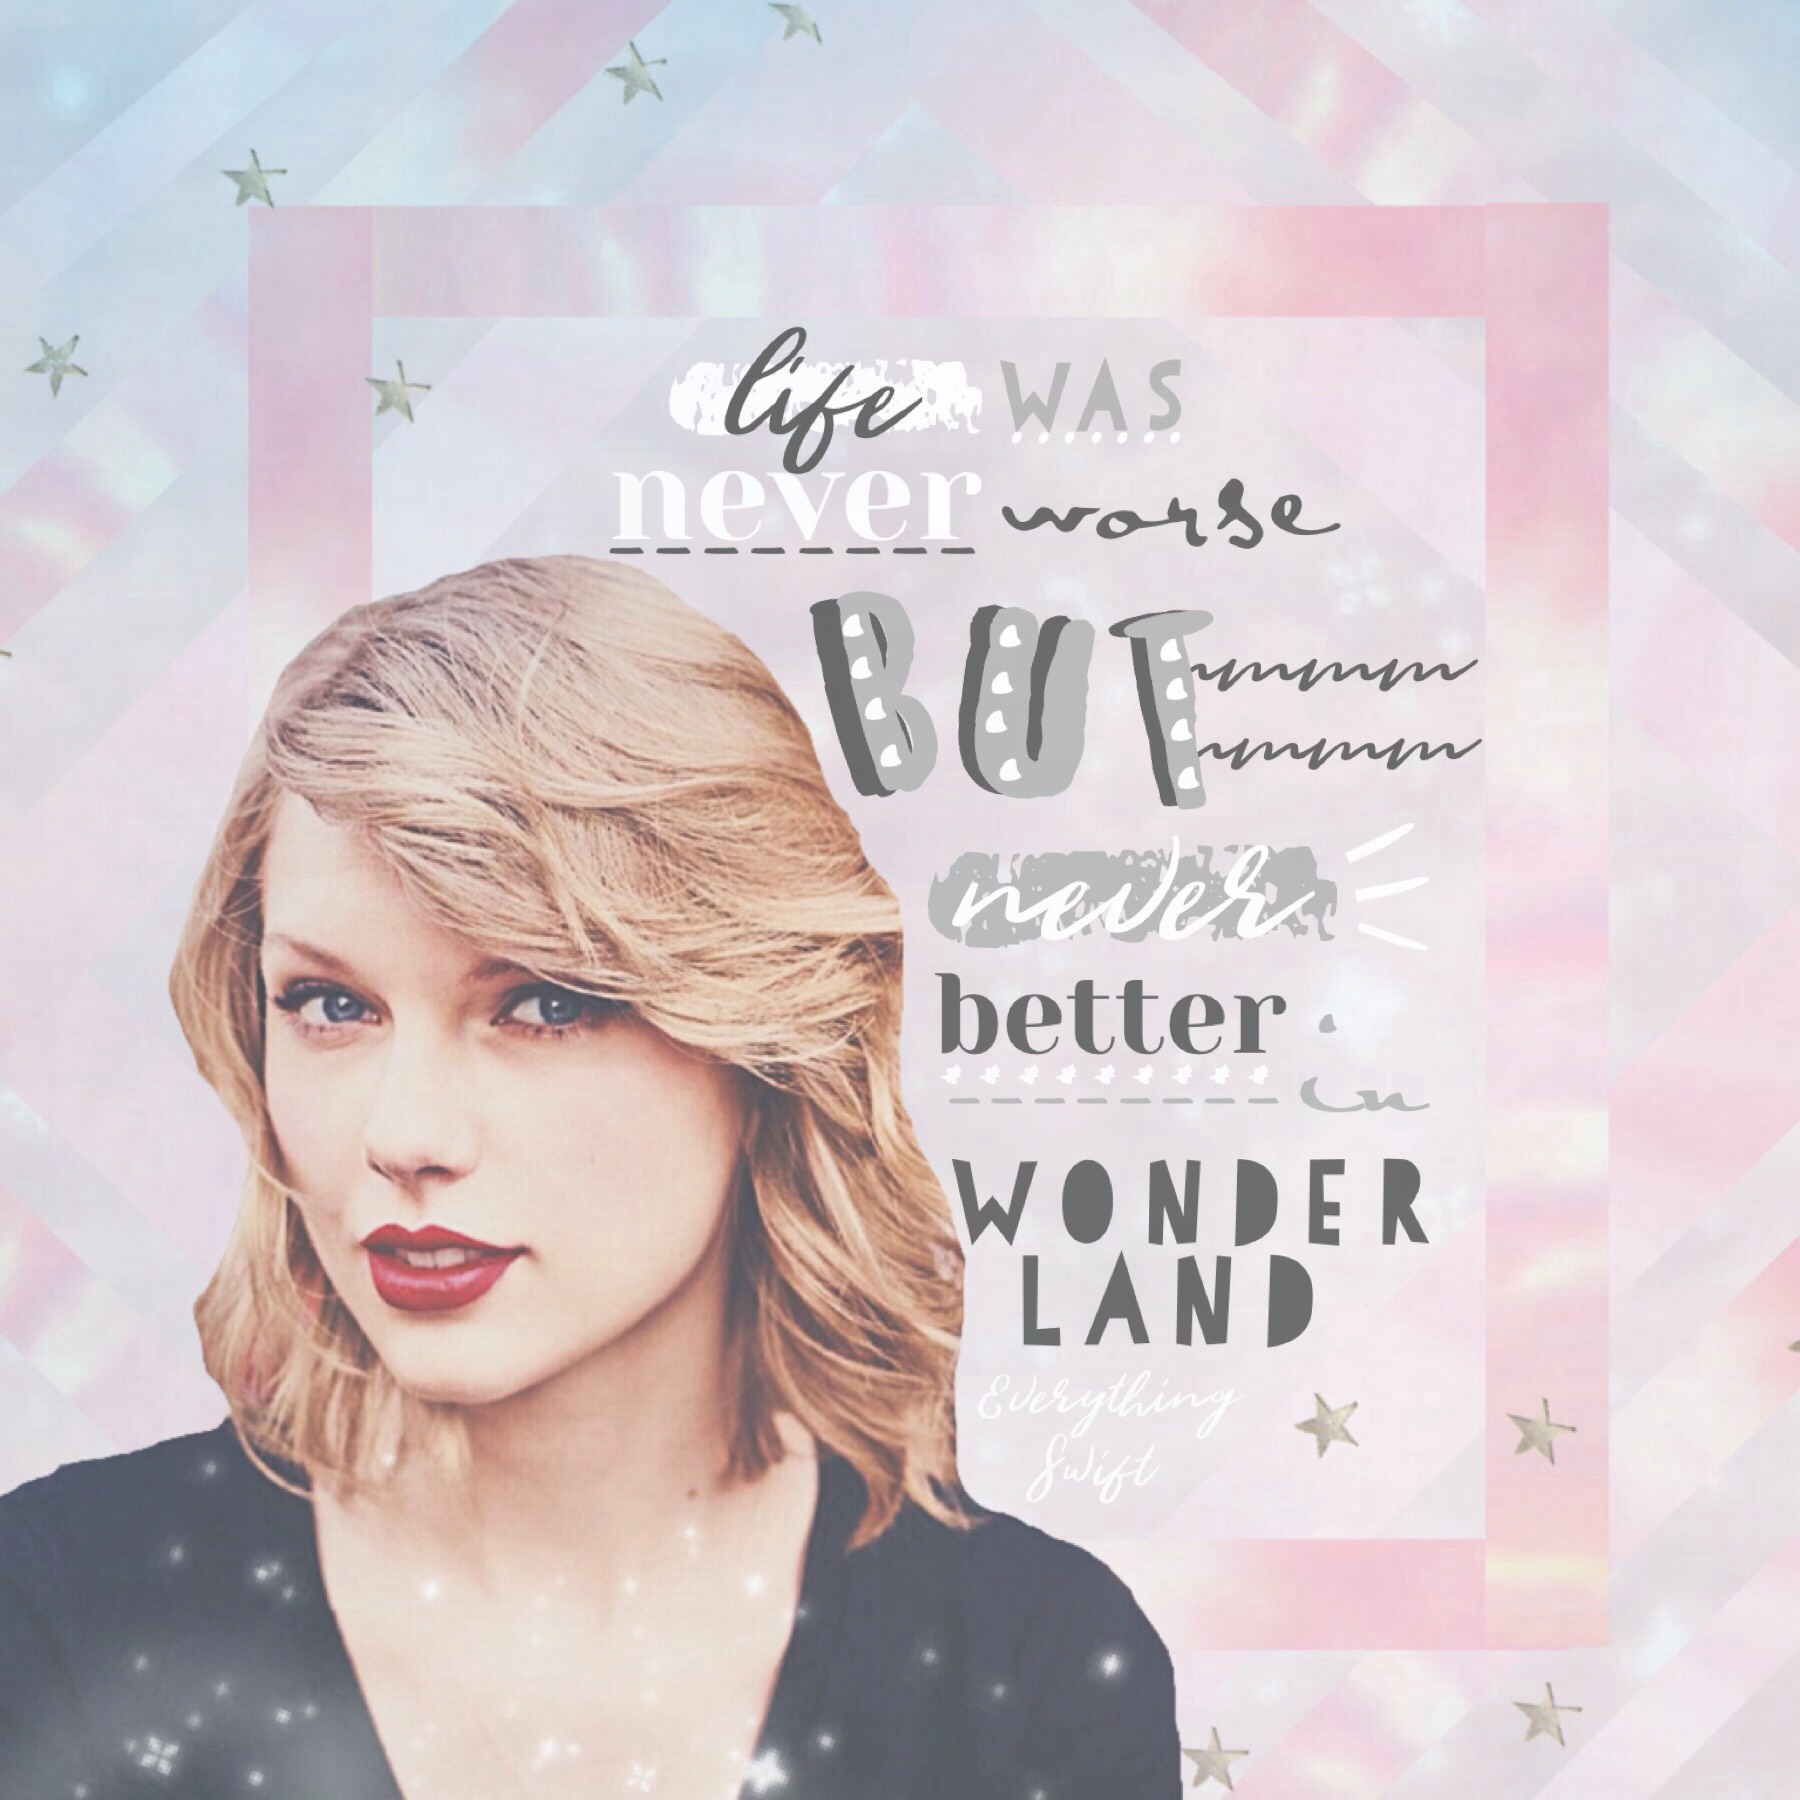 Yay I posted! I'm trying to focus on text more. How did I do? Tap! 💕
QOTD: Fav Taylor Swift bonus track?
AOTD: You Are In Love (my fav song ever) but I love 
Wonderland and New Romantics too